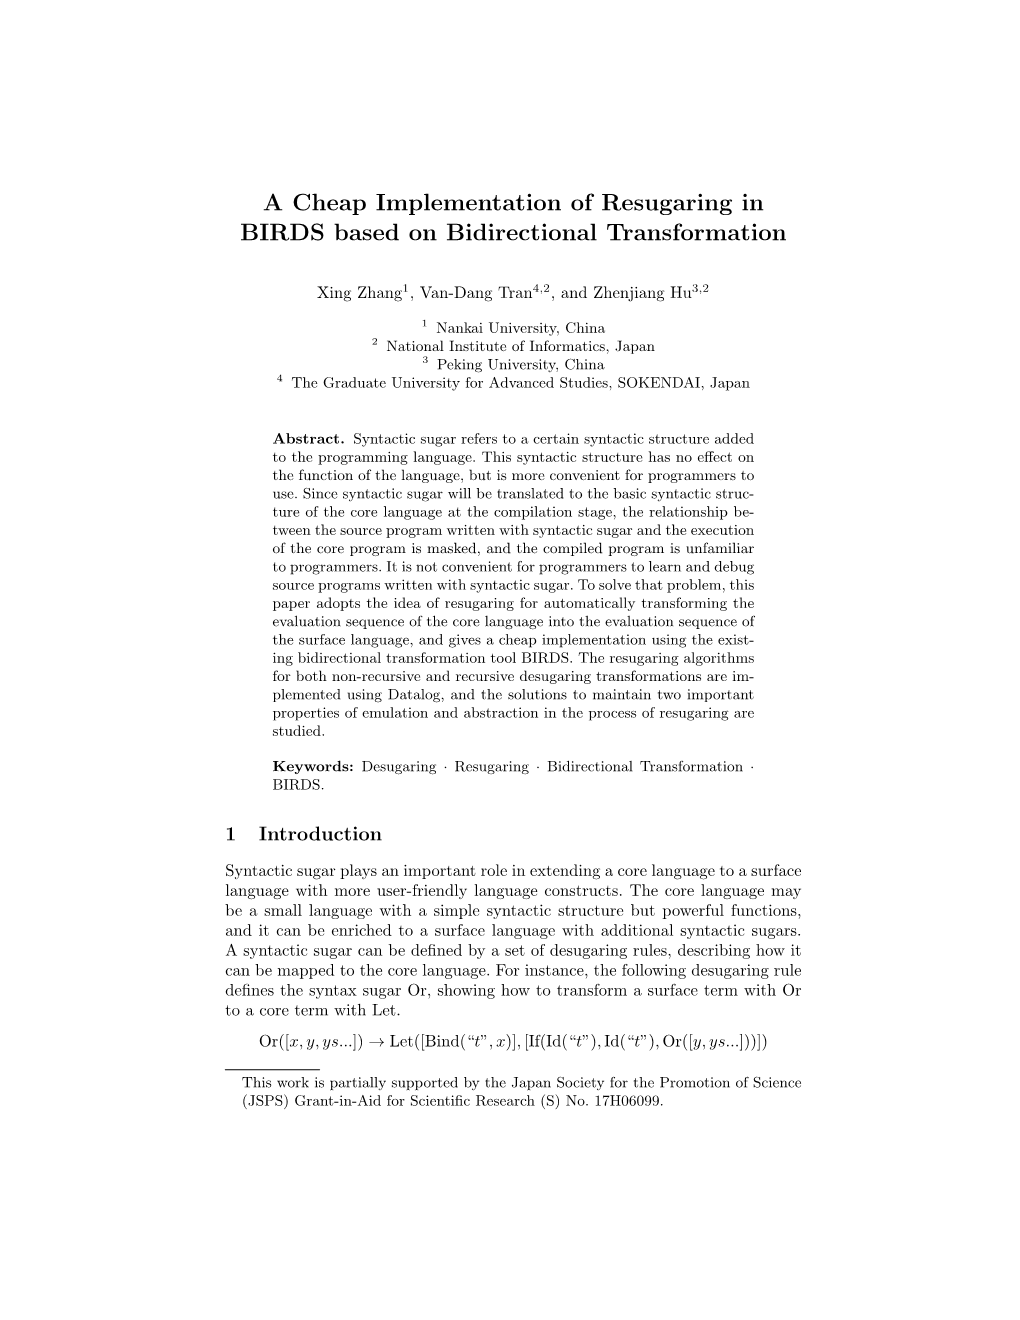 A Cheap Implementation of Resugaring in BIRDS Based on Bidirectional Transformation